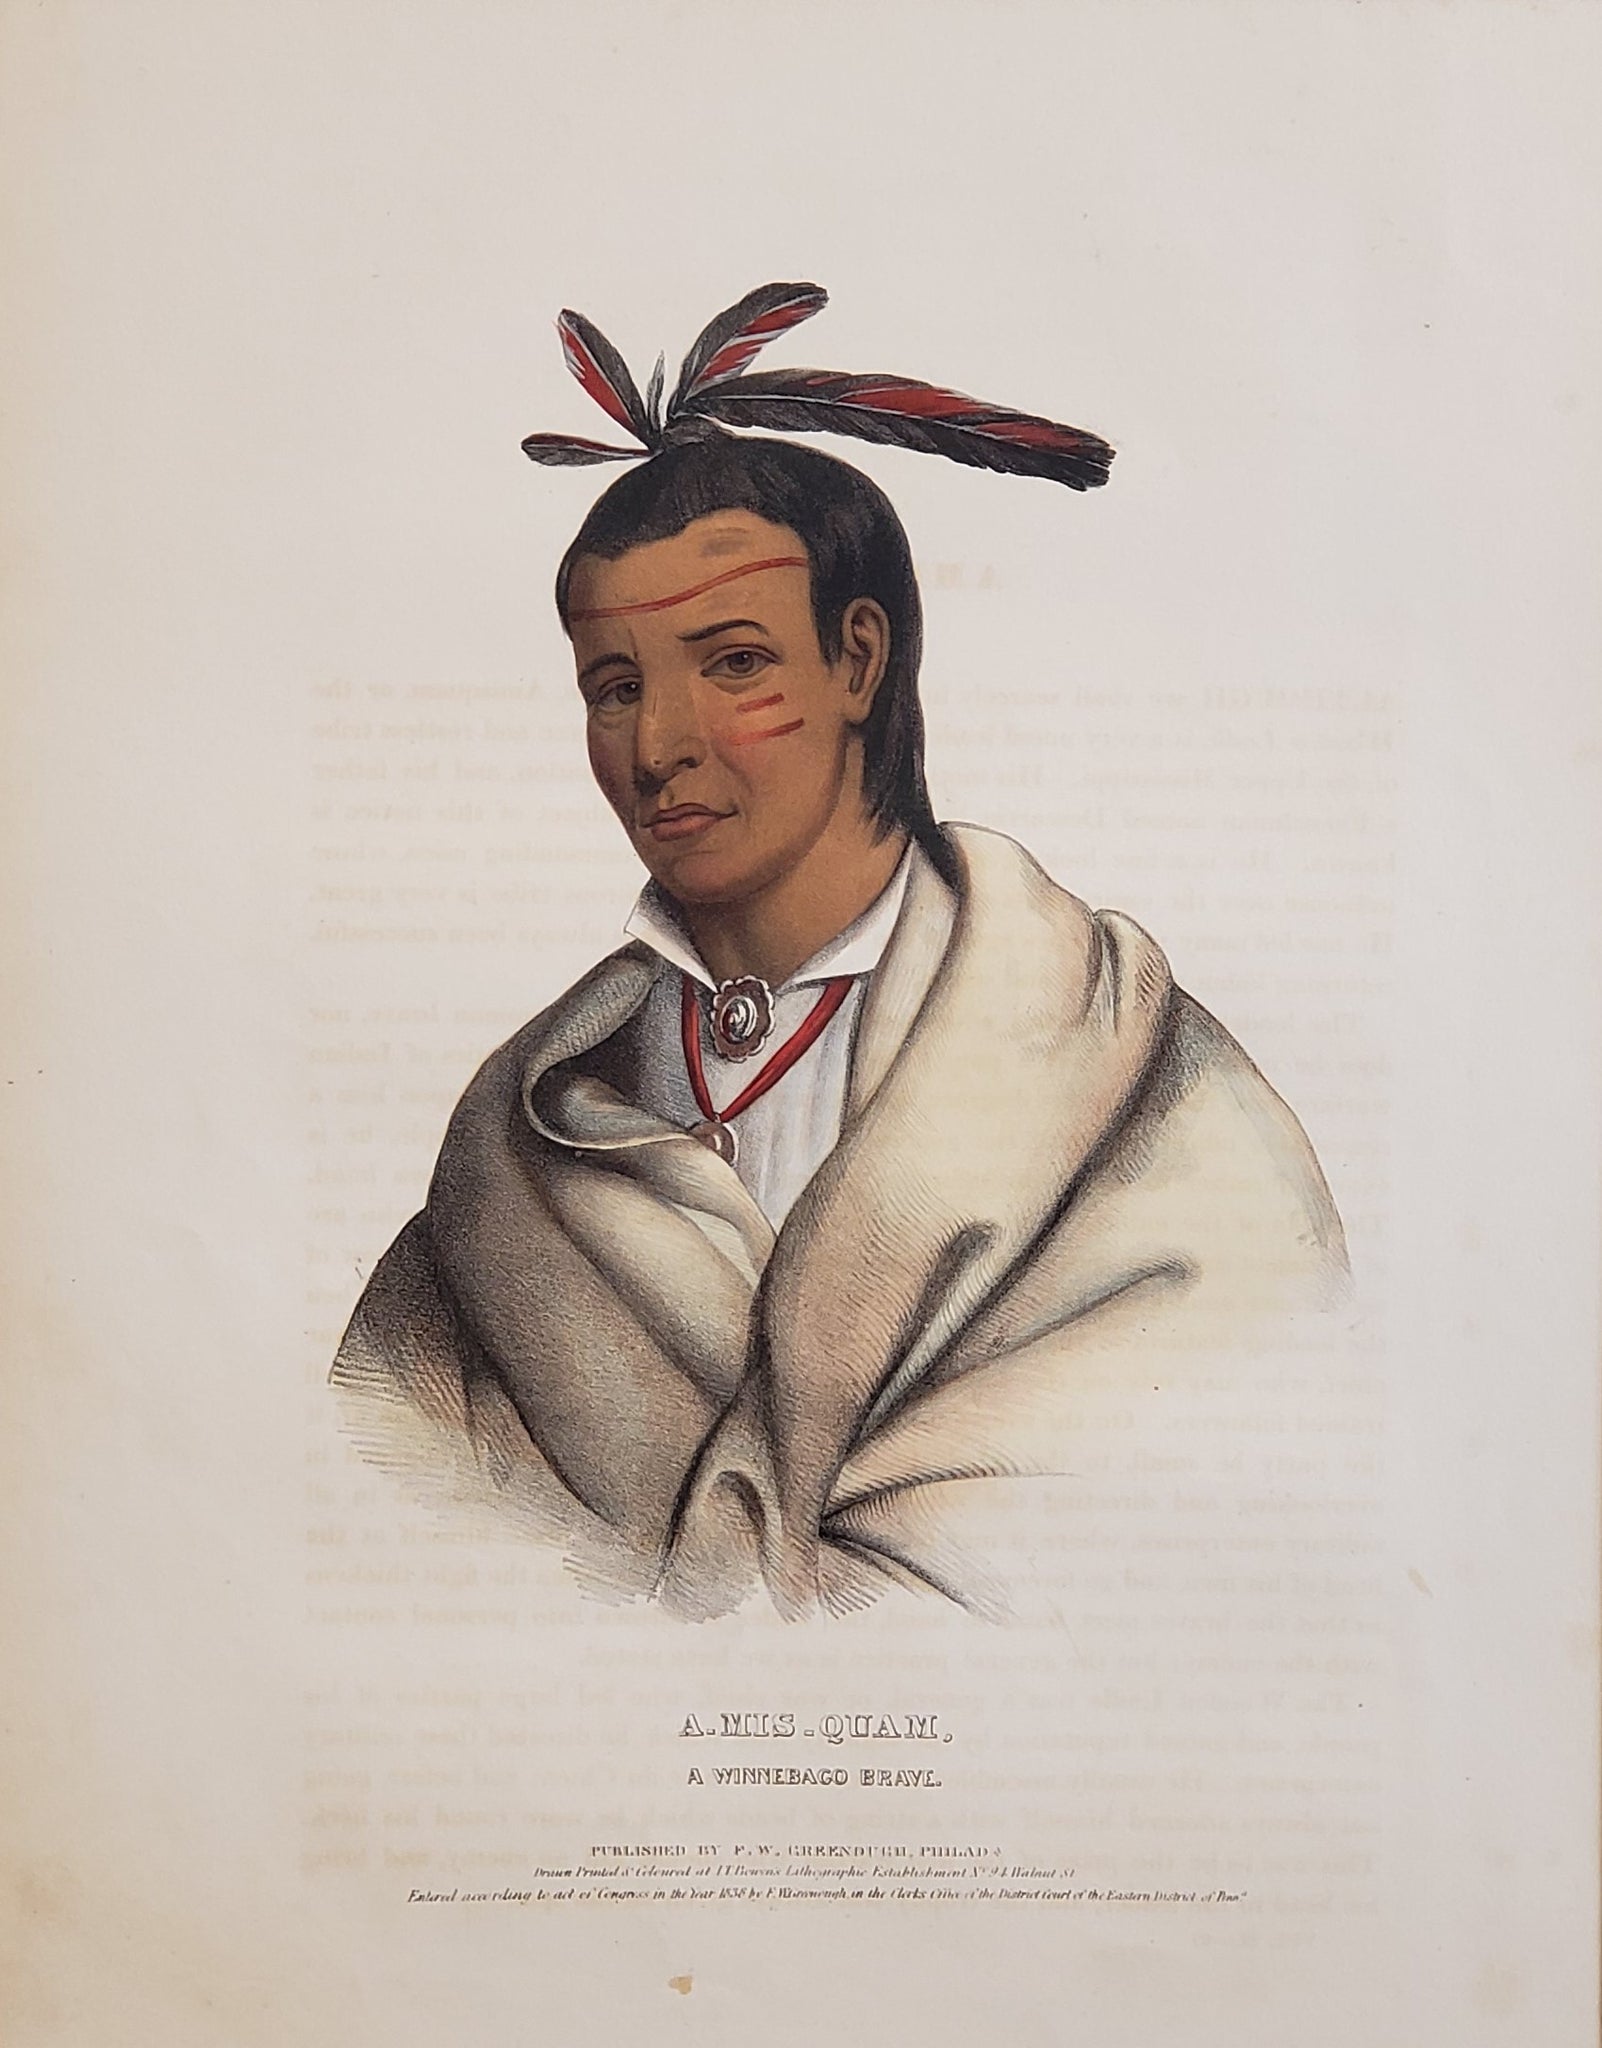 Antique Native American Art Print Portrait of A Winnebago Brave circa 1838 (19th century) by McKenney and Hall and was included in the book History of the Indian Tribes of North America.